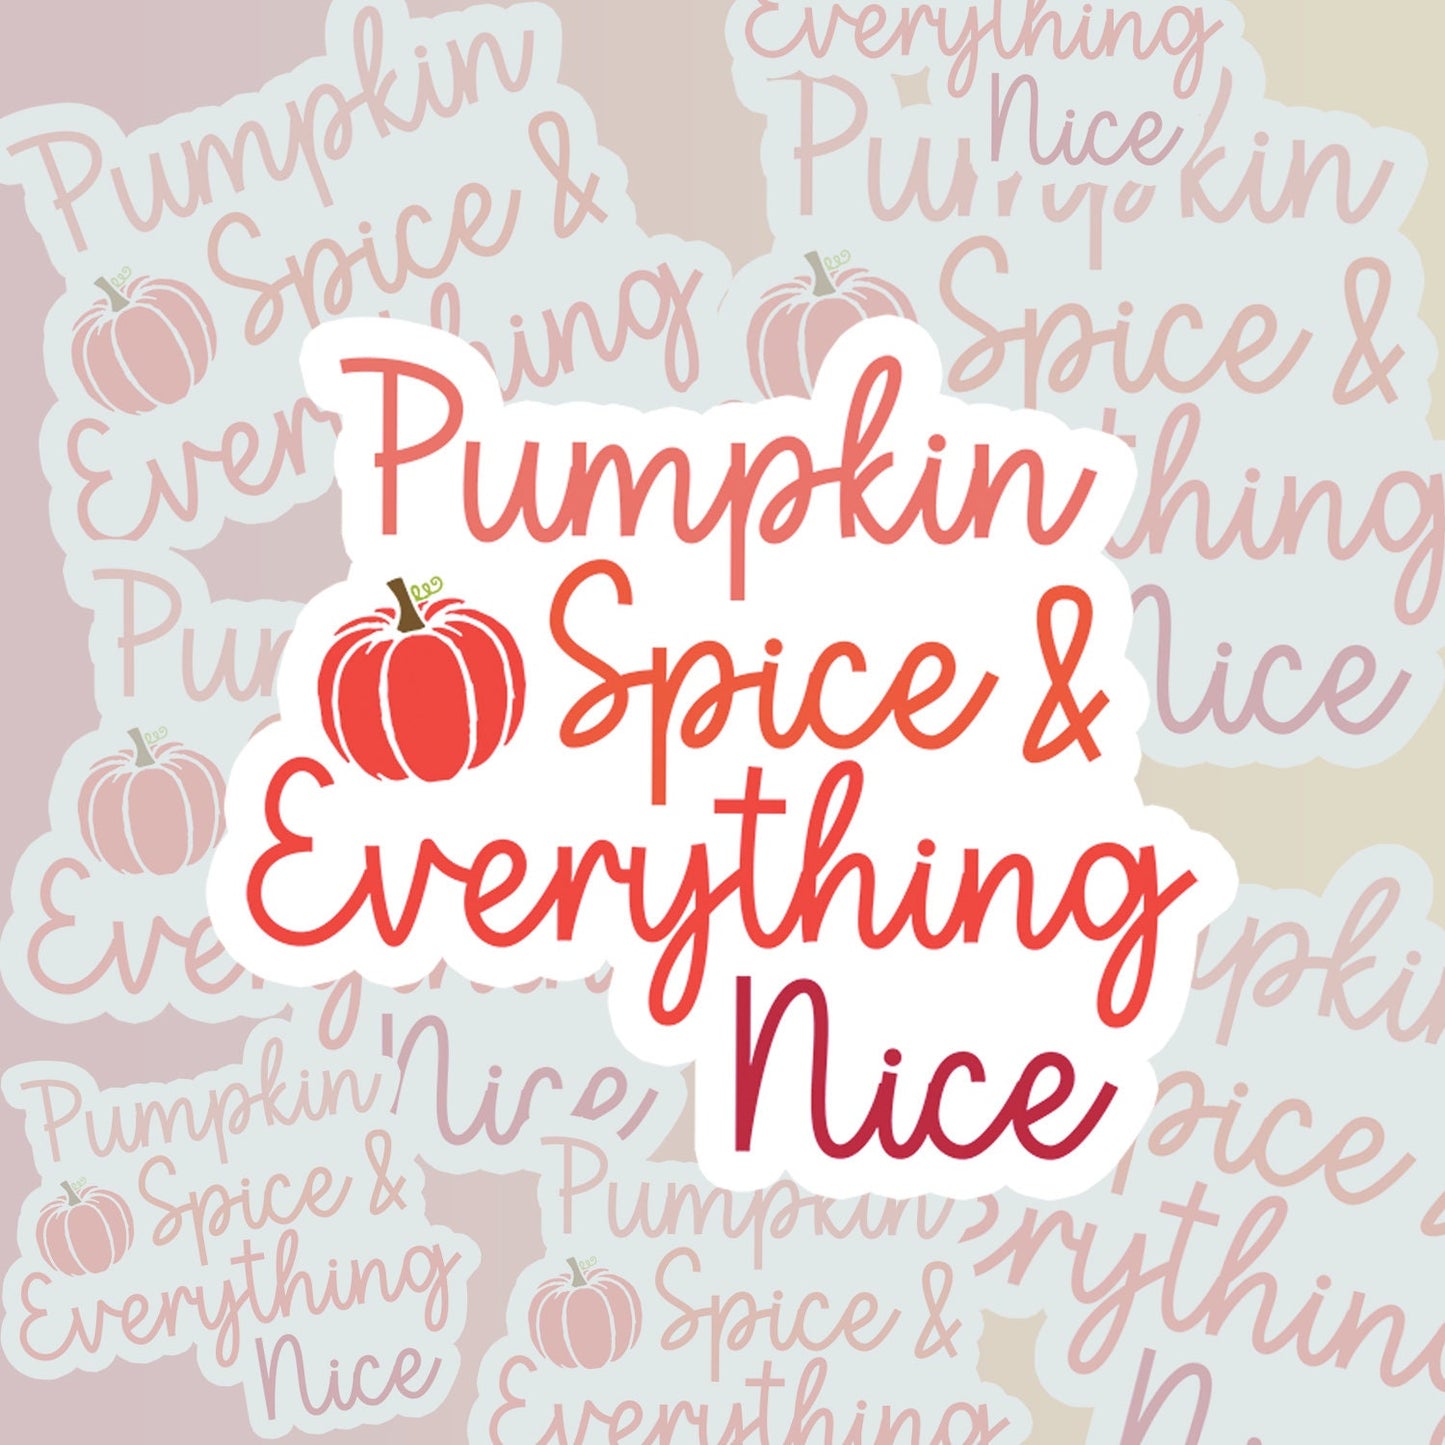 Pumpkin Spice and Everything Nice Waterproof Sticker - Waterproof sticker, Stanley sticker